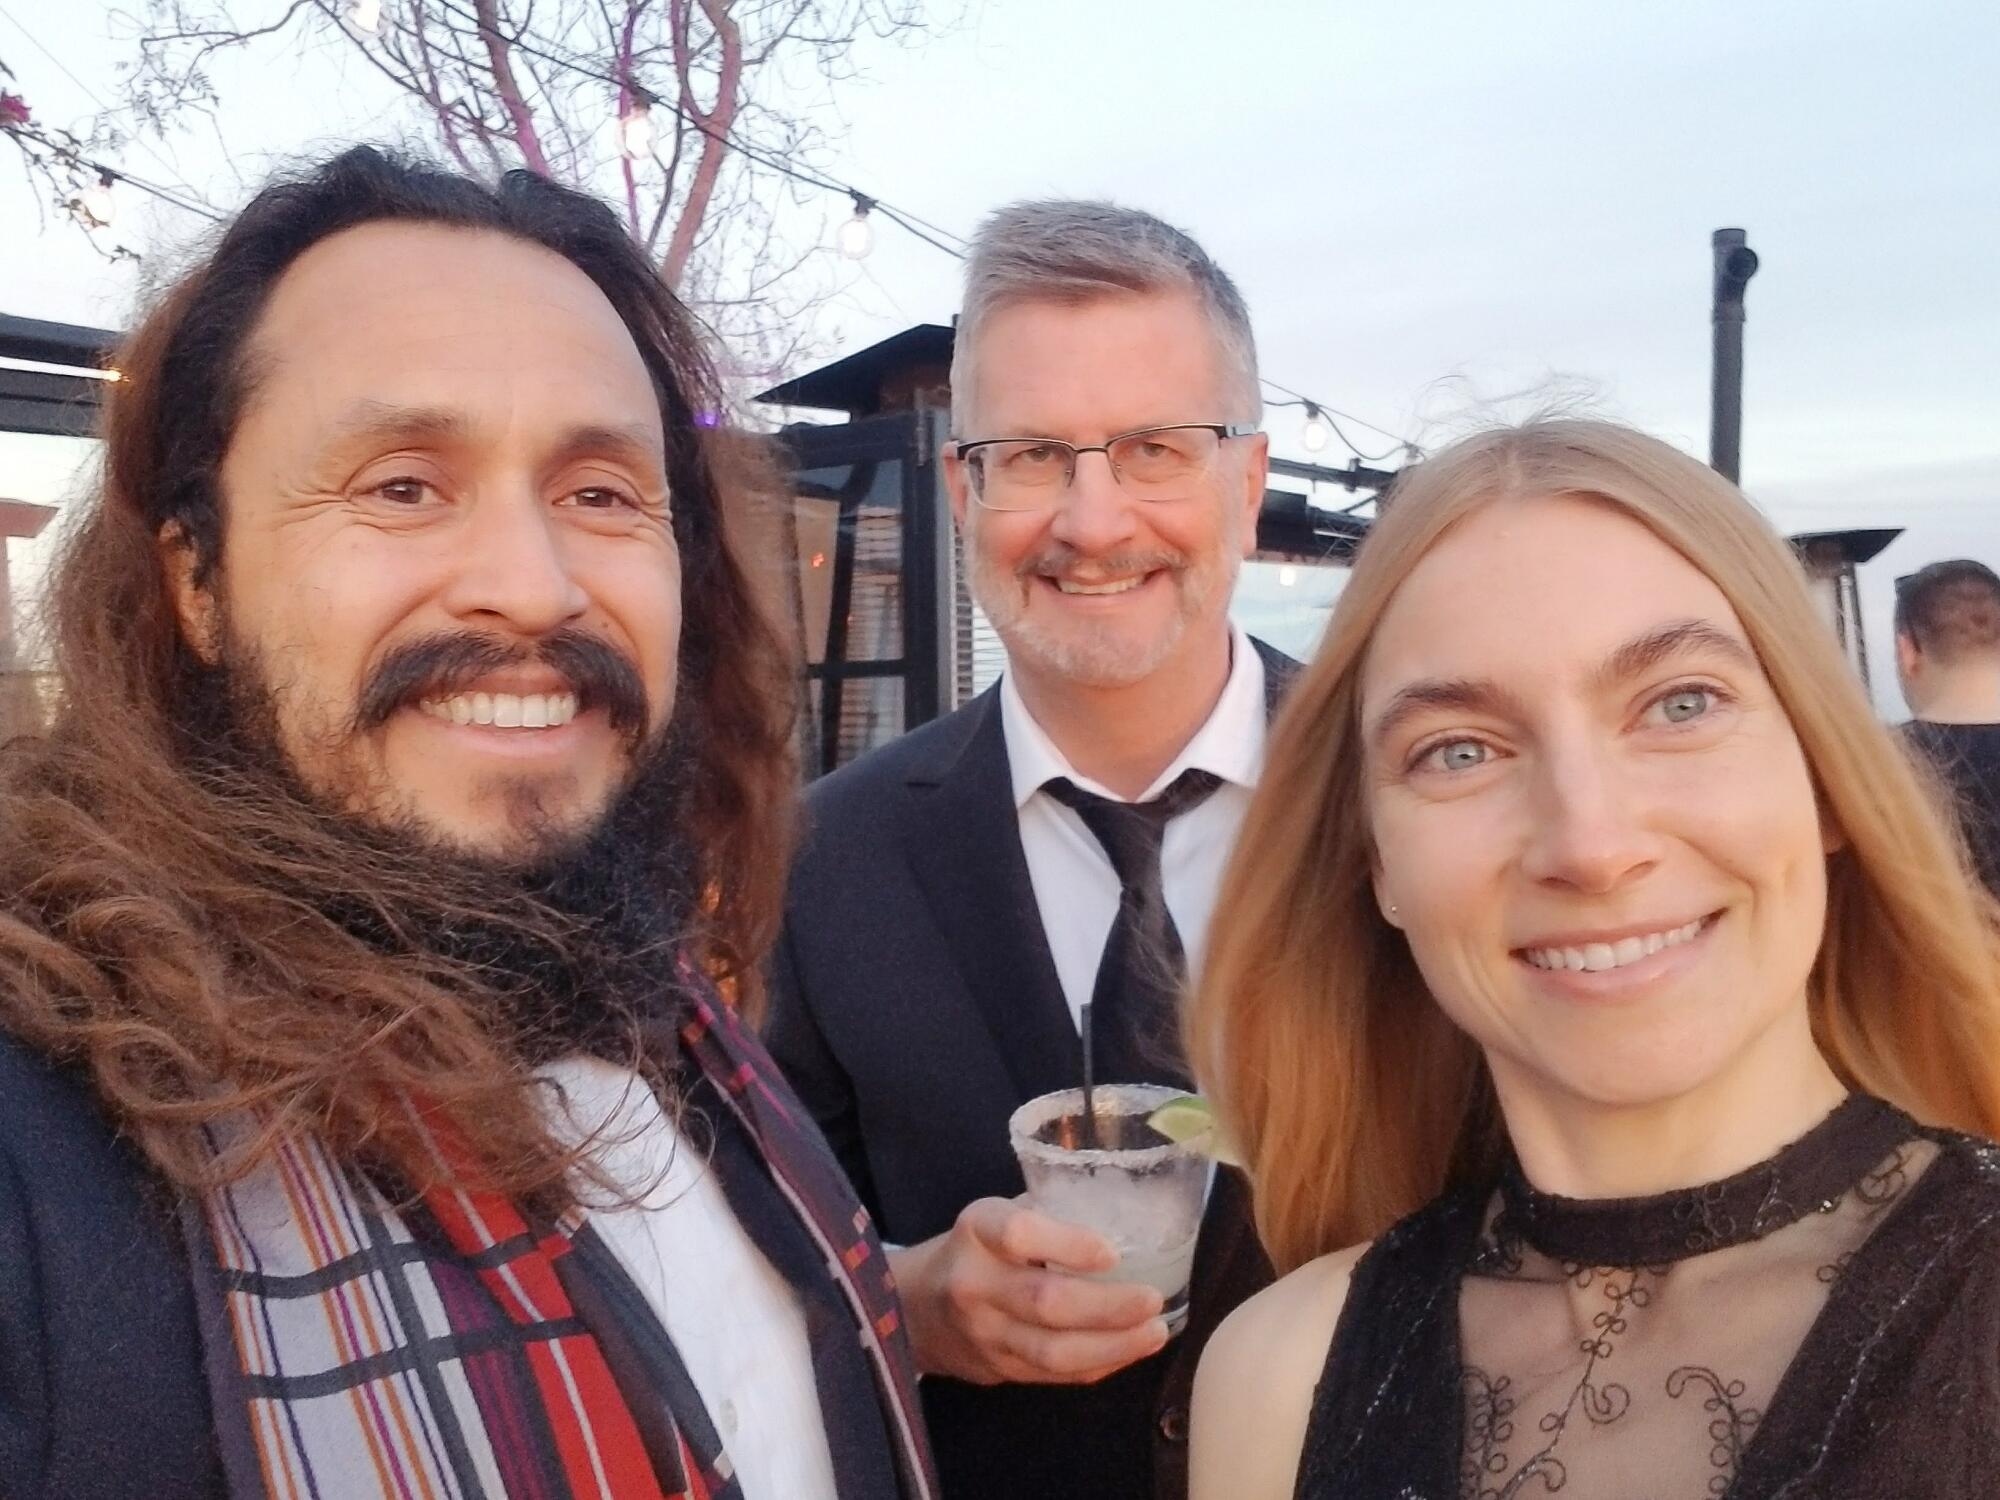 Mark Sawusch, center, drinks a cocktail with Anthony Flores and Anna Moore in 2017.